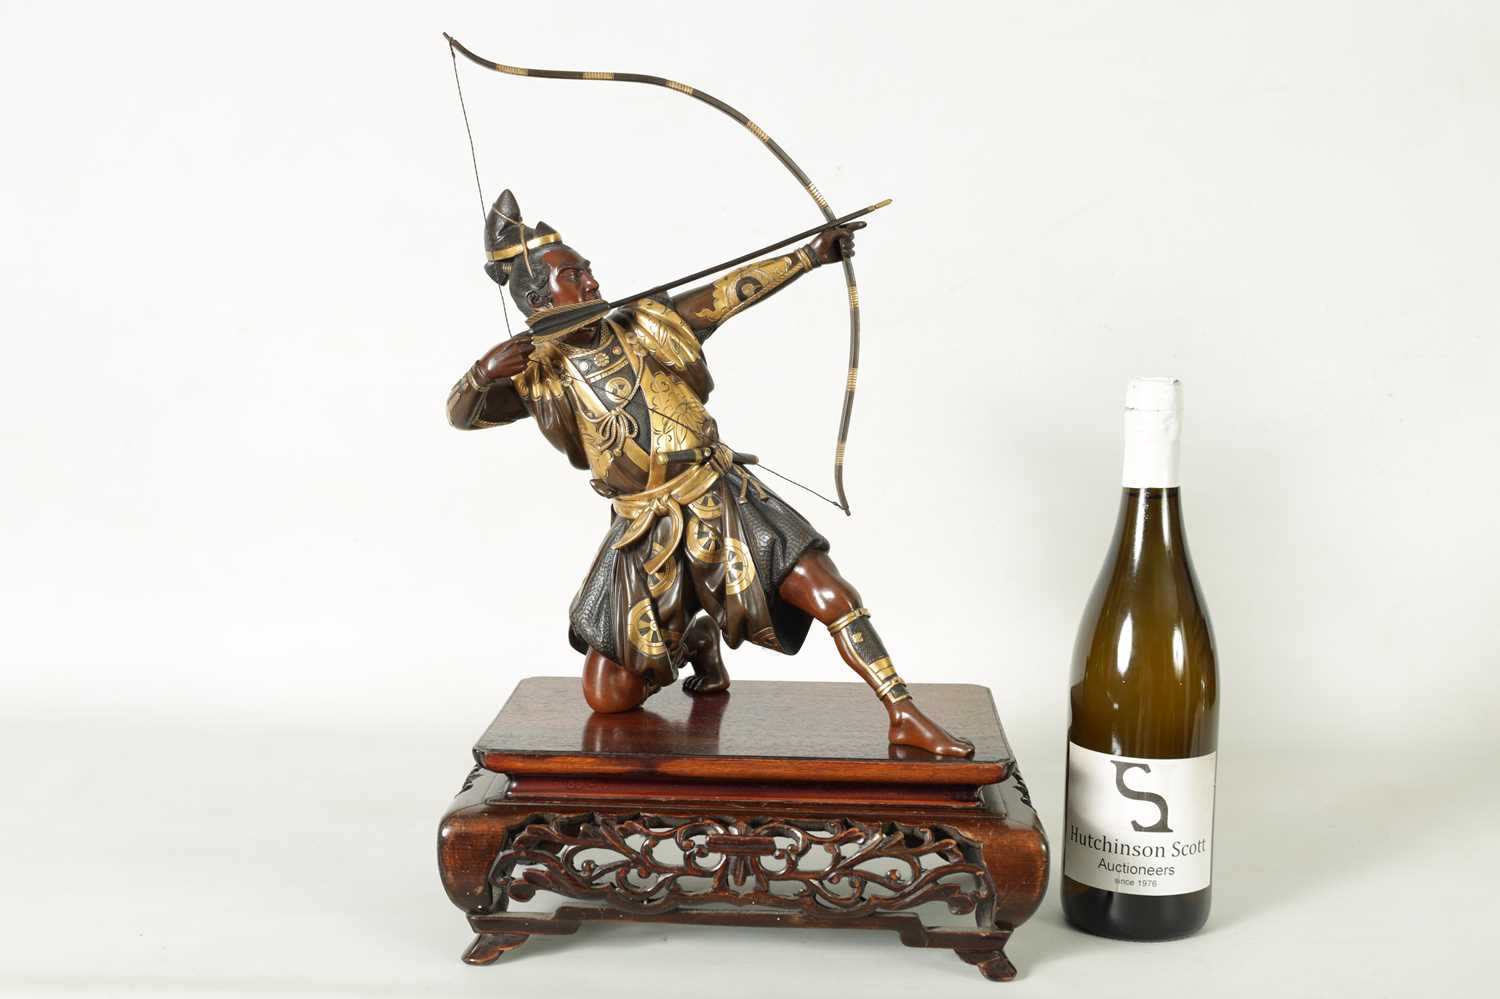 A FINE LATE 19TH CENTURY JAPANESE MEIJI PERIOD BRONZE AND MIXED METAL SAMURAI ARCHER OF LARGE SIZE - Image 3 of 13